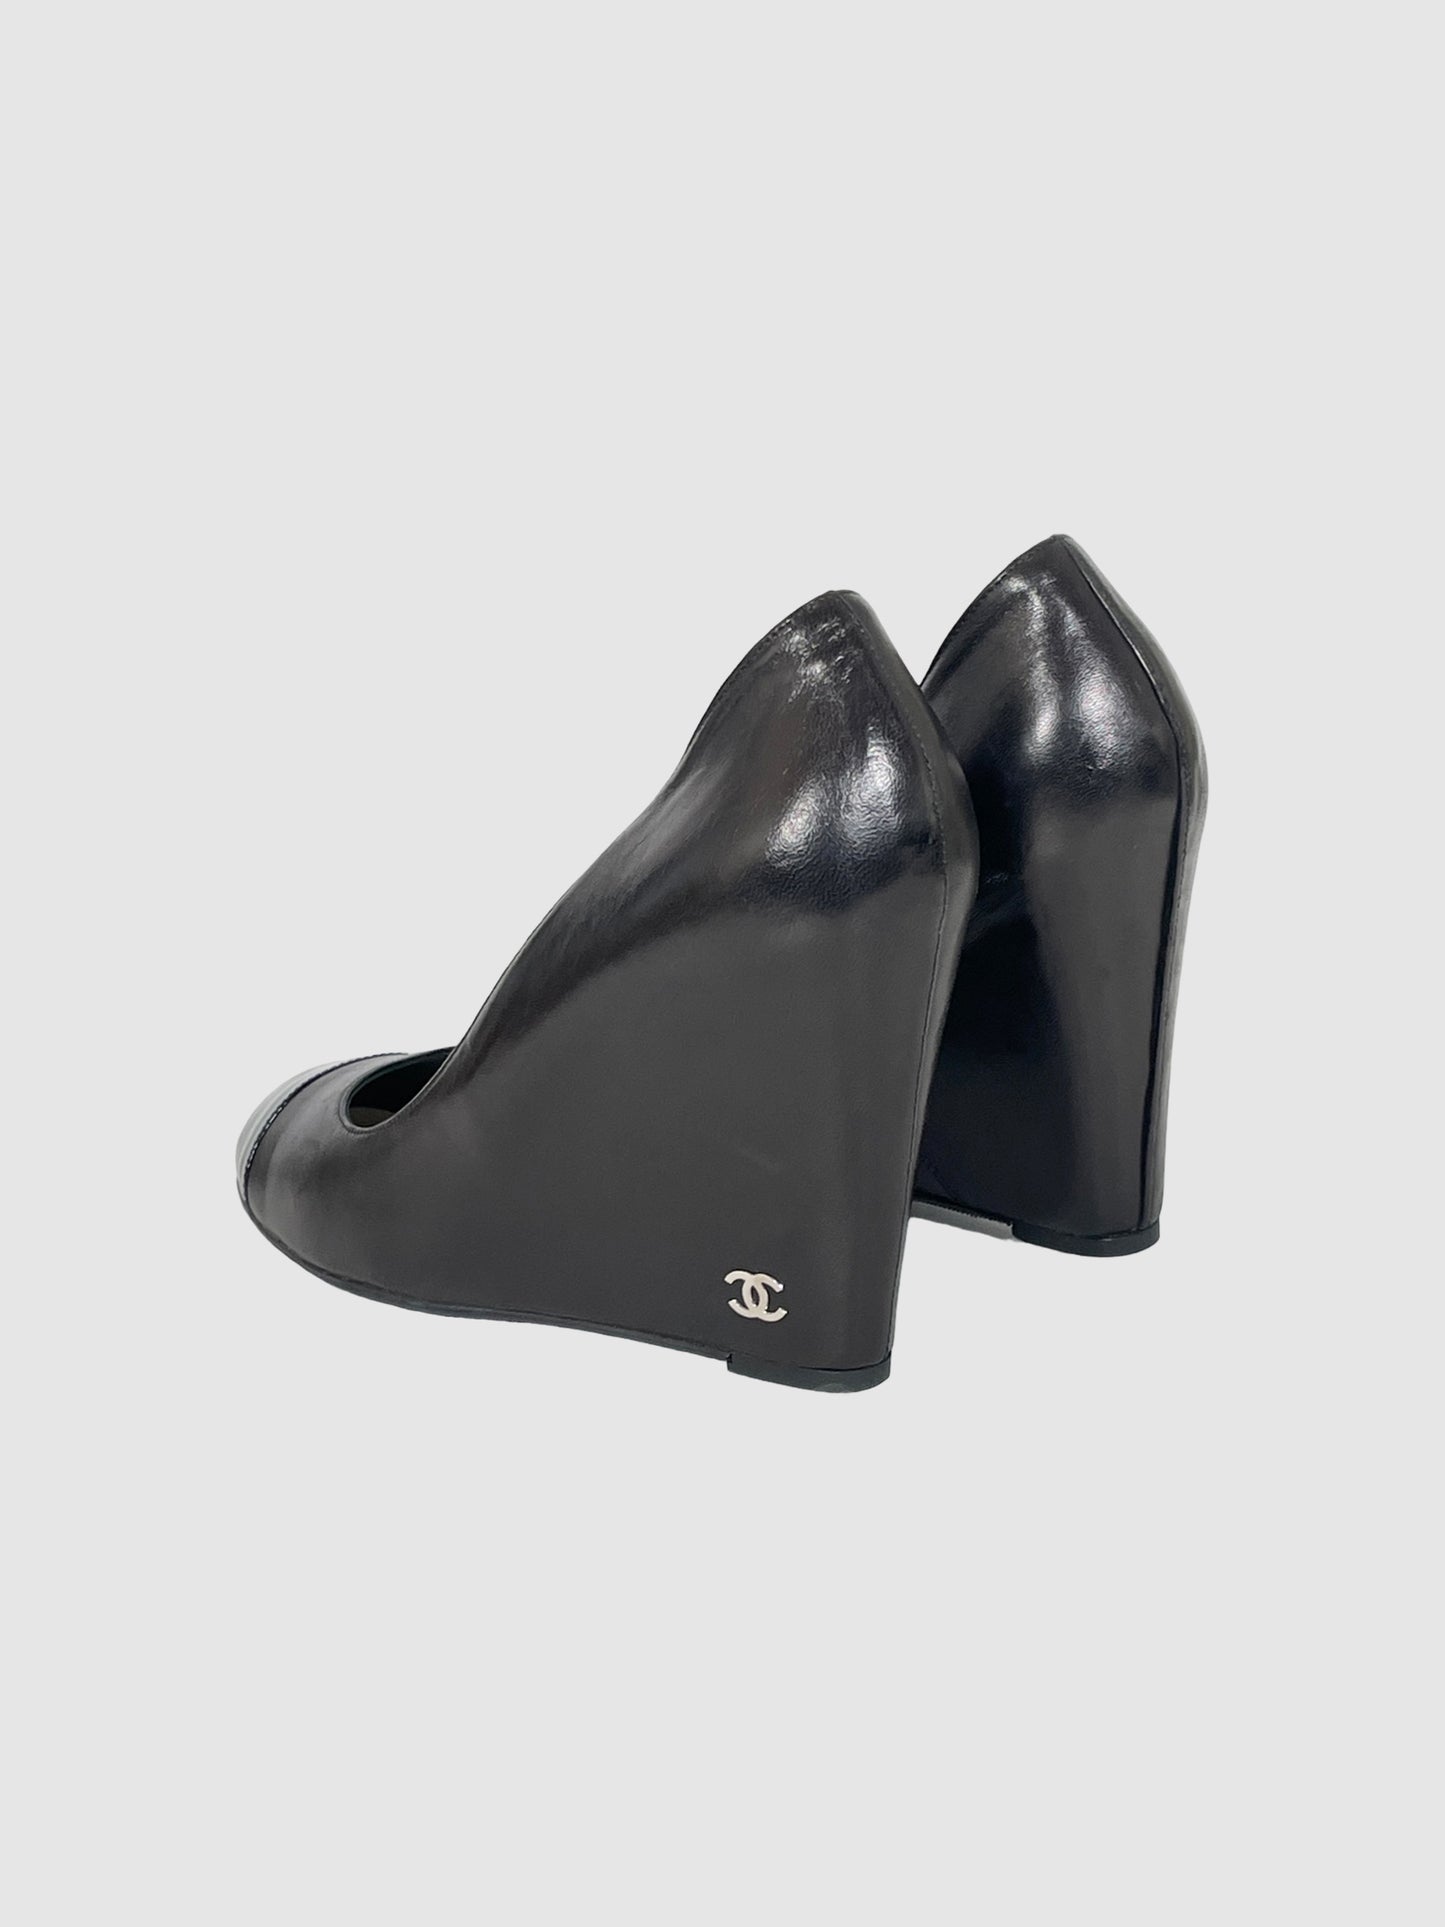 Leather Wedges - Size 40